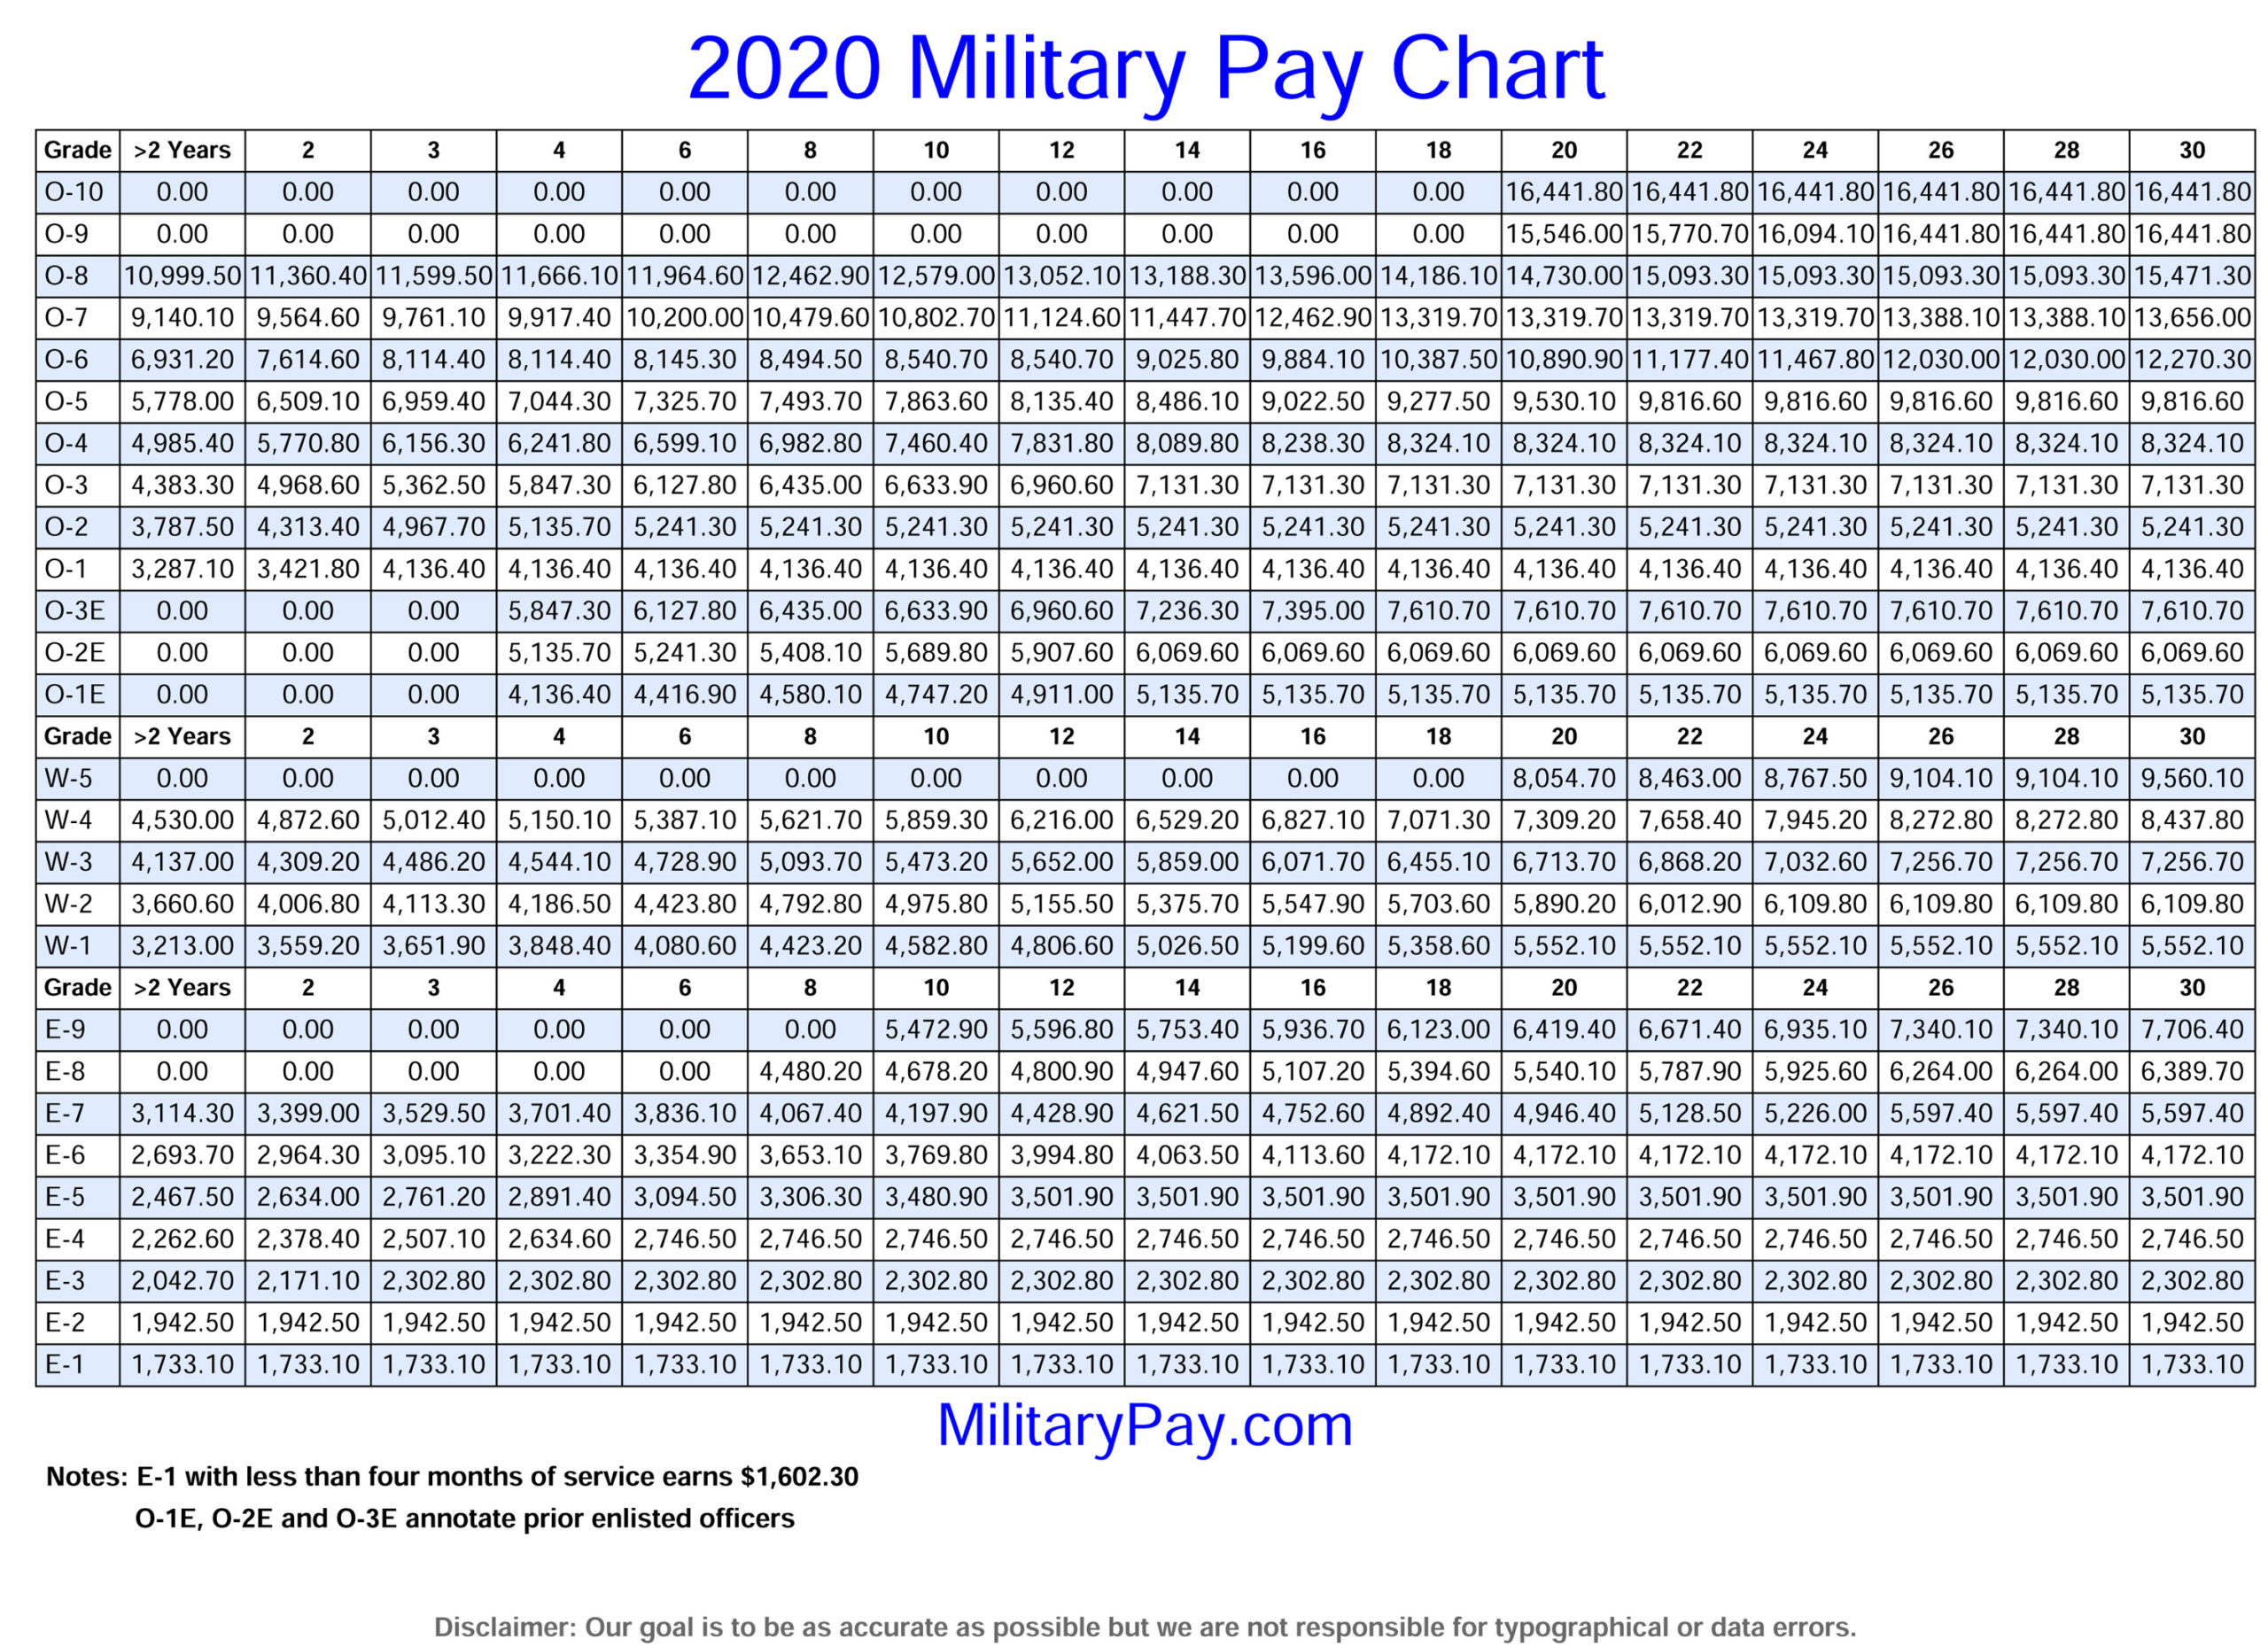 Military Pay Charts | 1949 To 2021 Plus Estimated To 2050